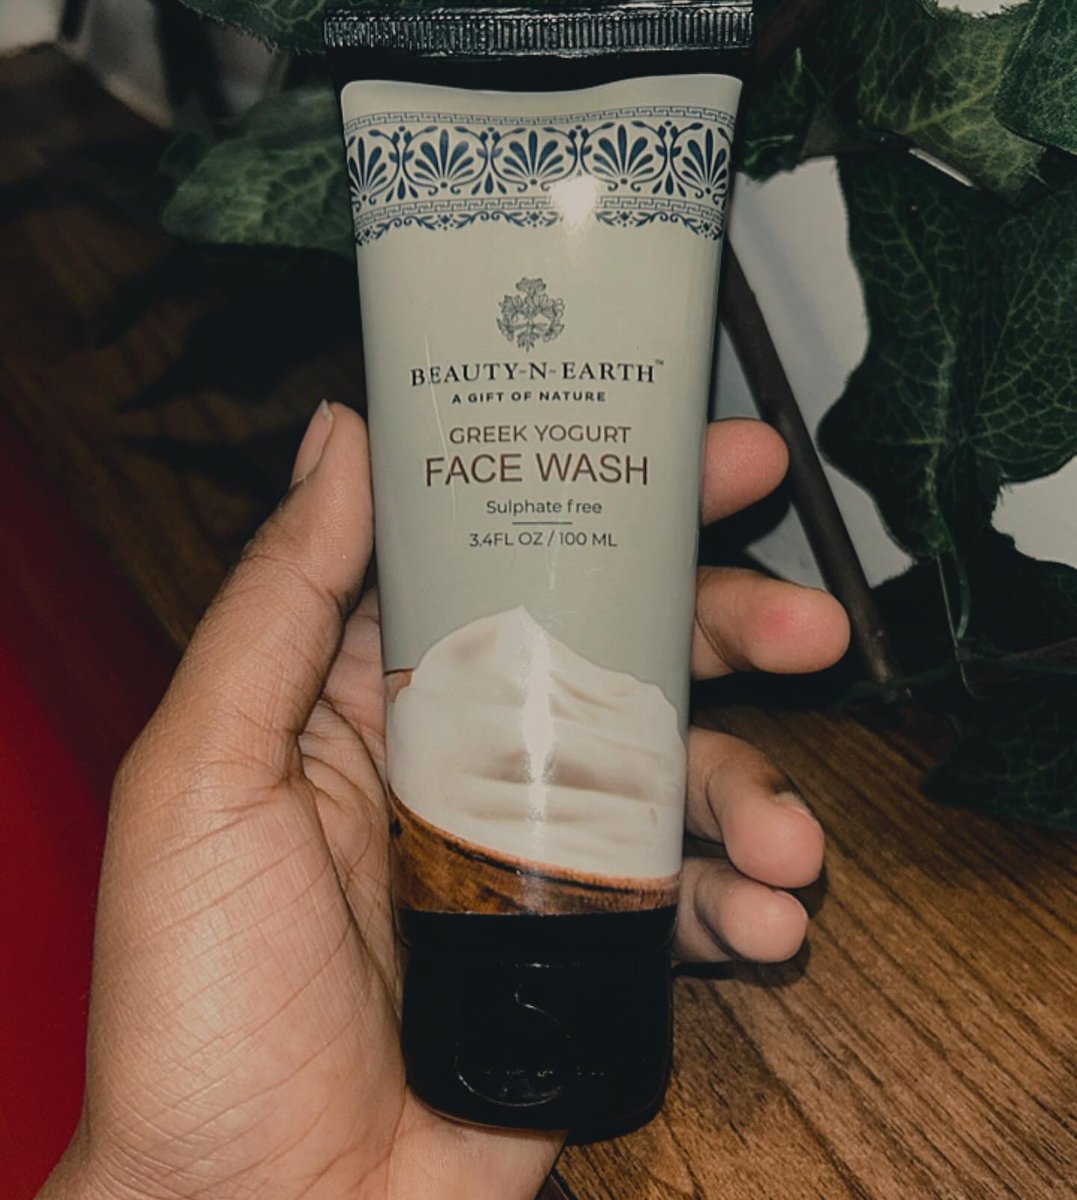 Indulge your skin with our Greek Yogurt Facewash–now sulfate and paraben free! 🥣✨Experience the nourishing benefits of yogurt for a fresh, glowing complexion.
Grab it here-beautynearth.com/product/greek-…
#YogurtSkincare #NaturalIngredients #SkincareEssentials #HealthySkin #beautynearth